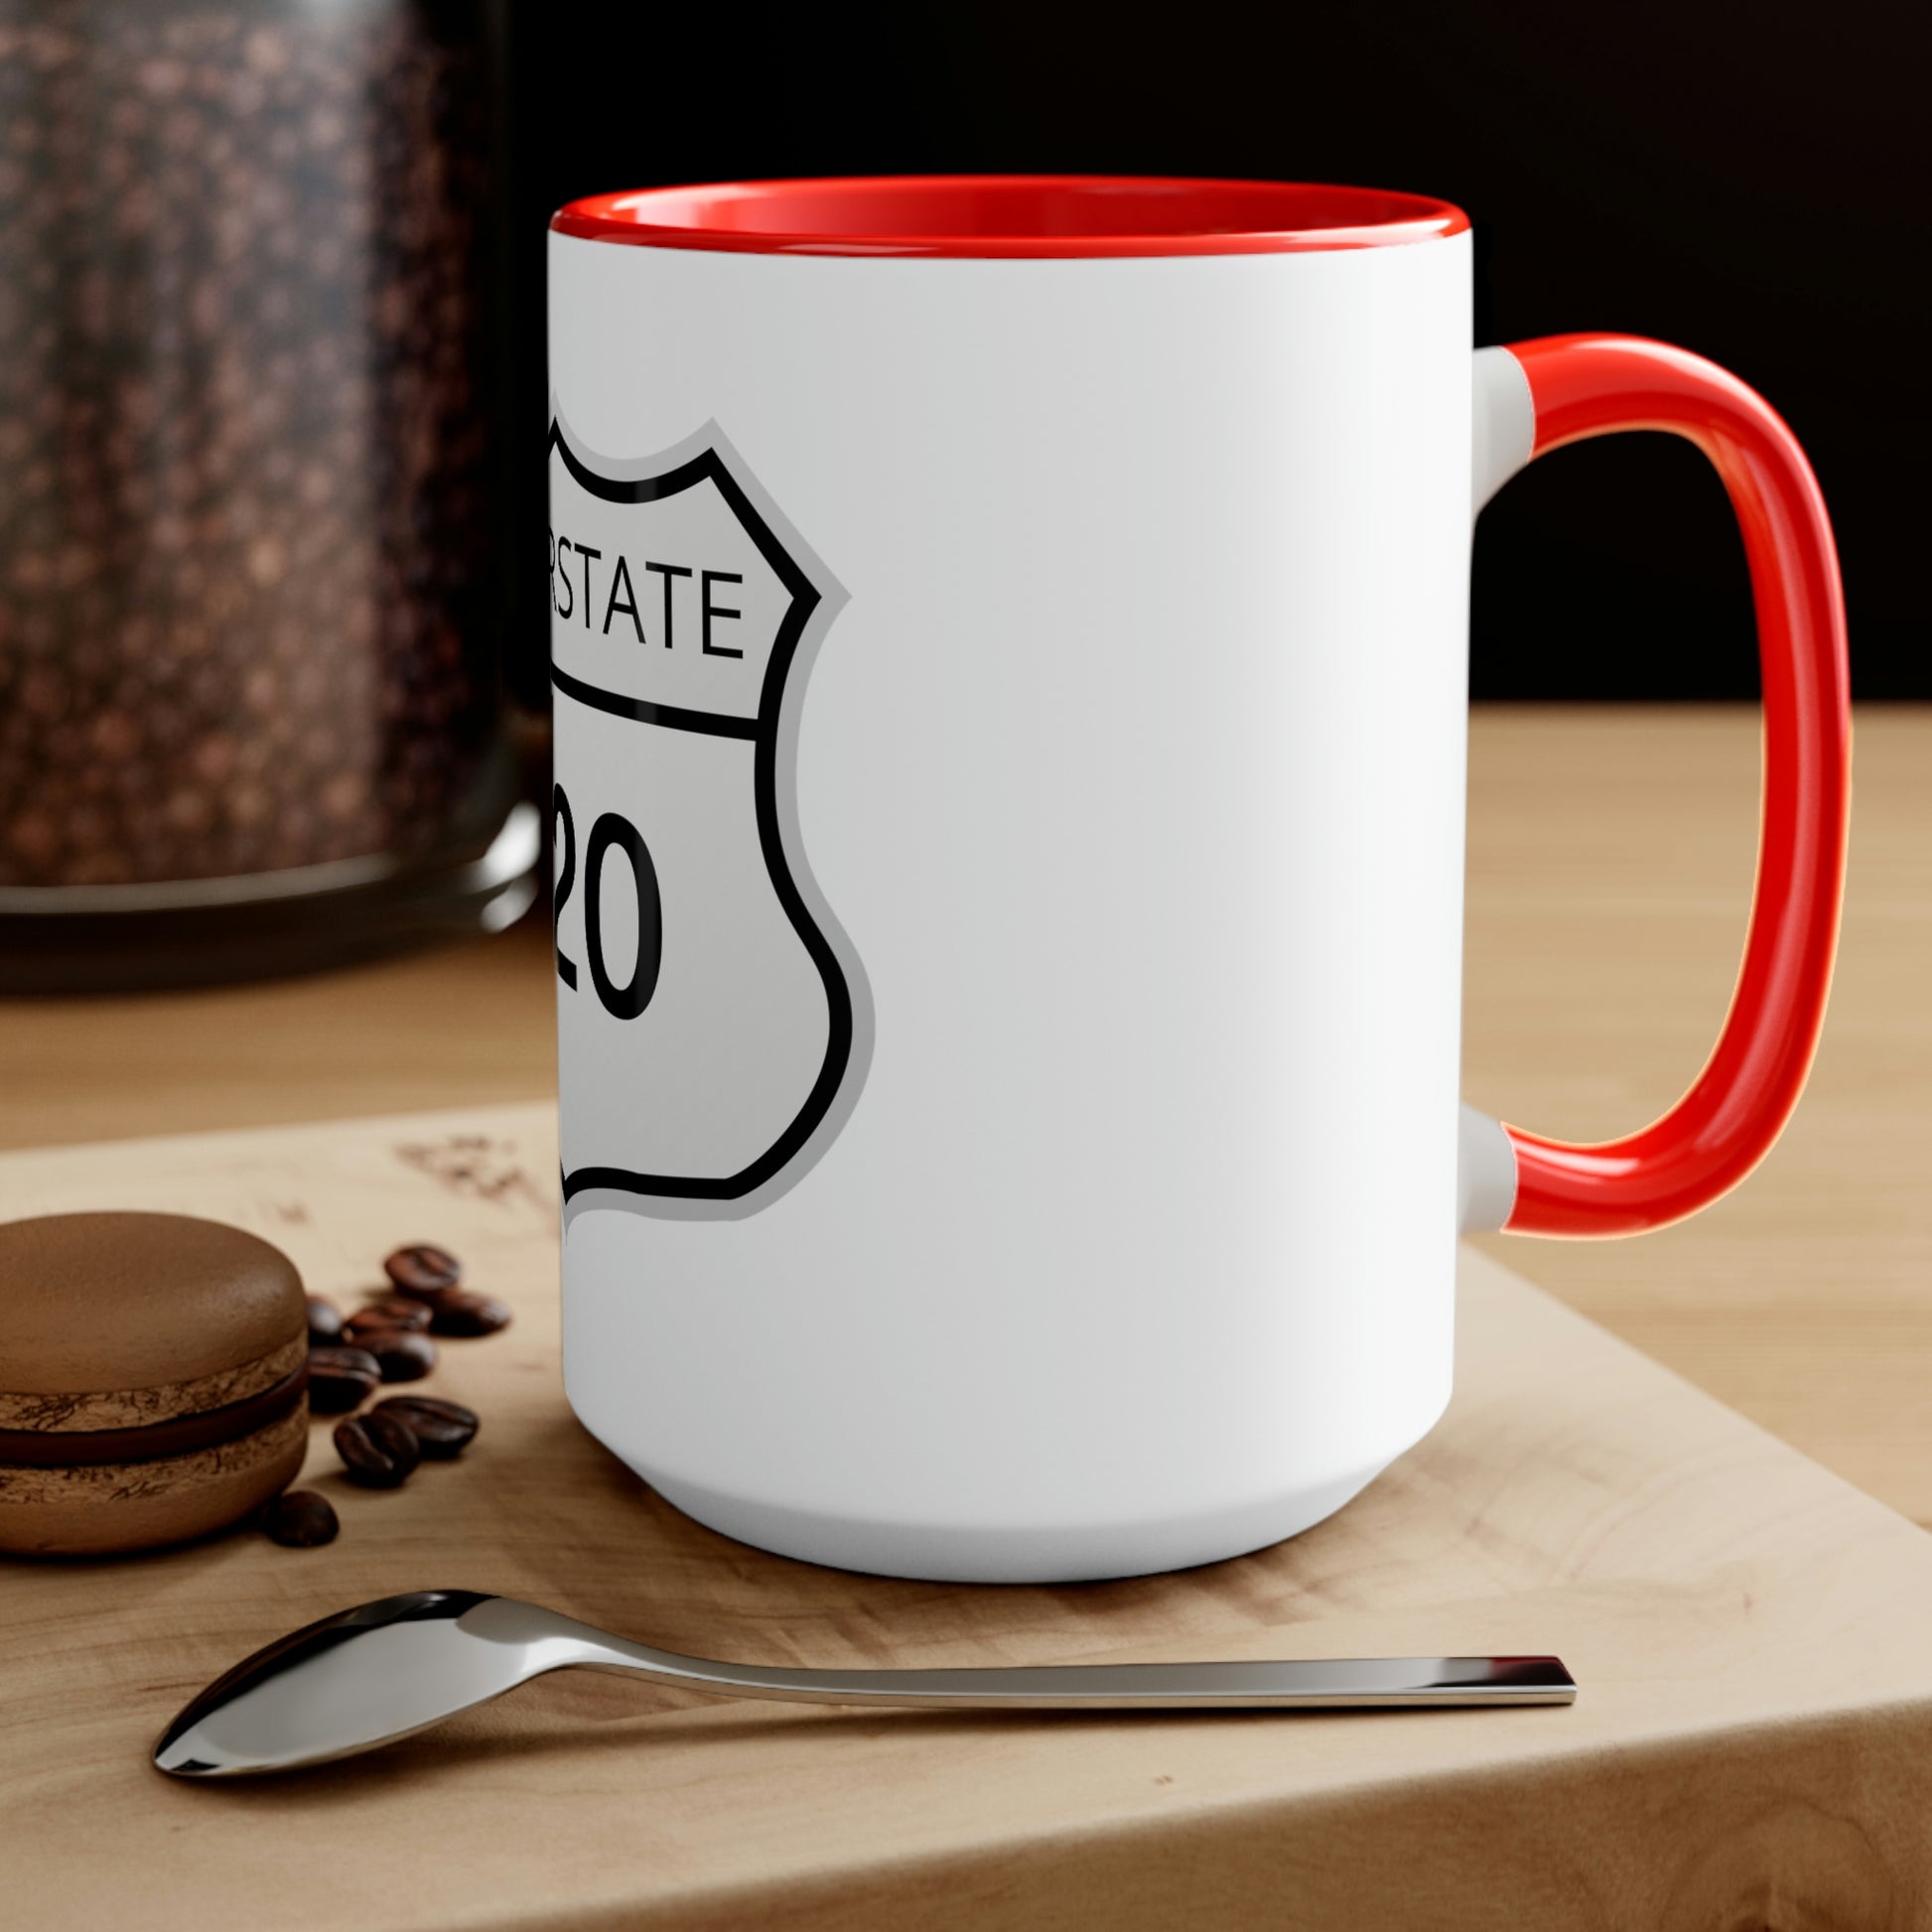 Interstate 420 Two-Tone red and white Coffee Mug on top of a wooden table